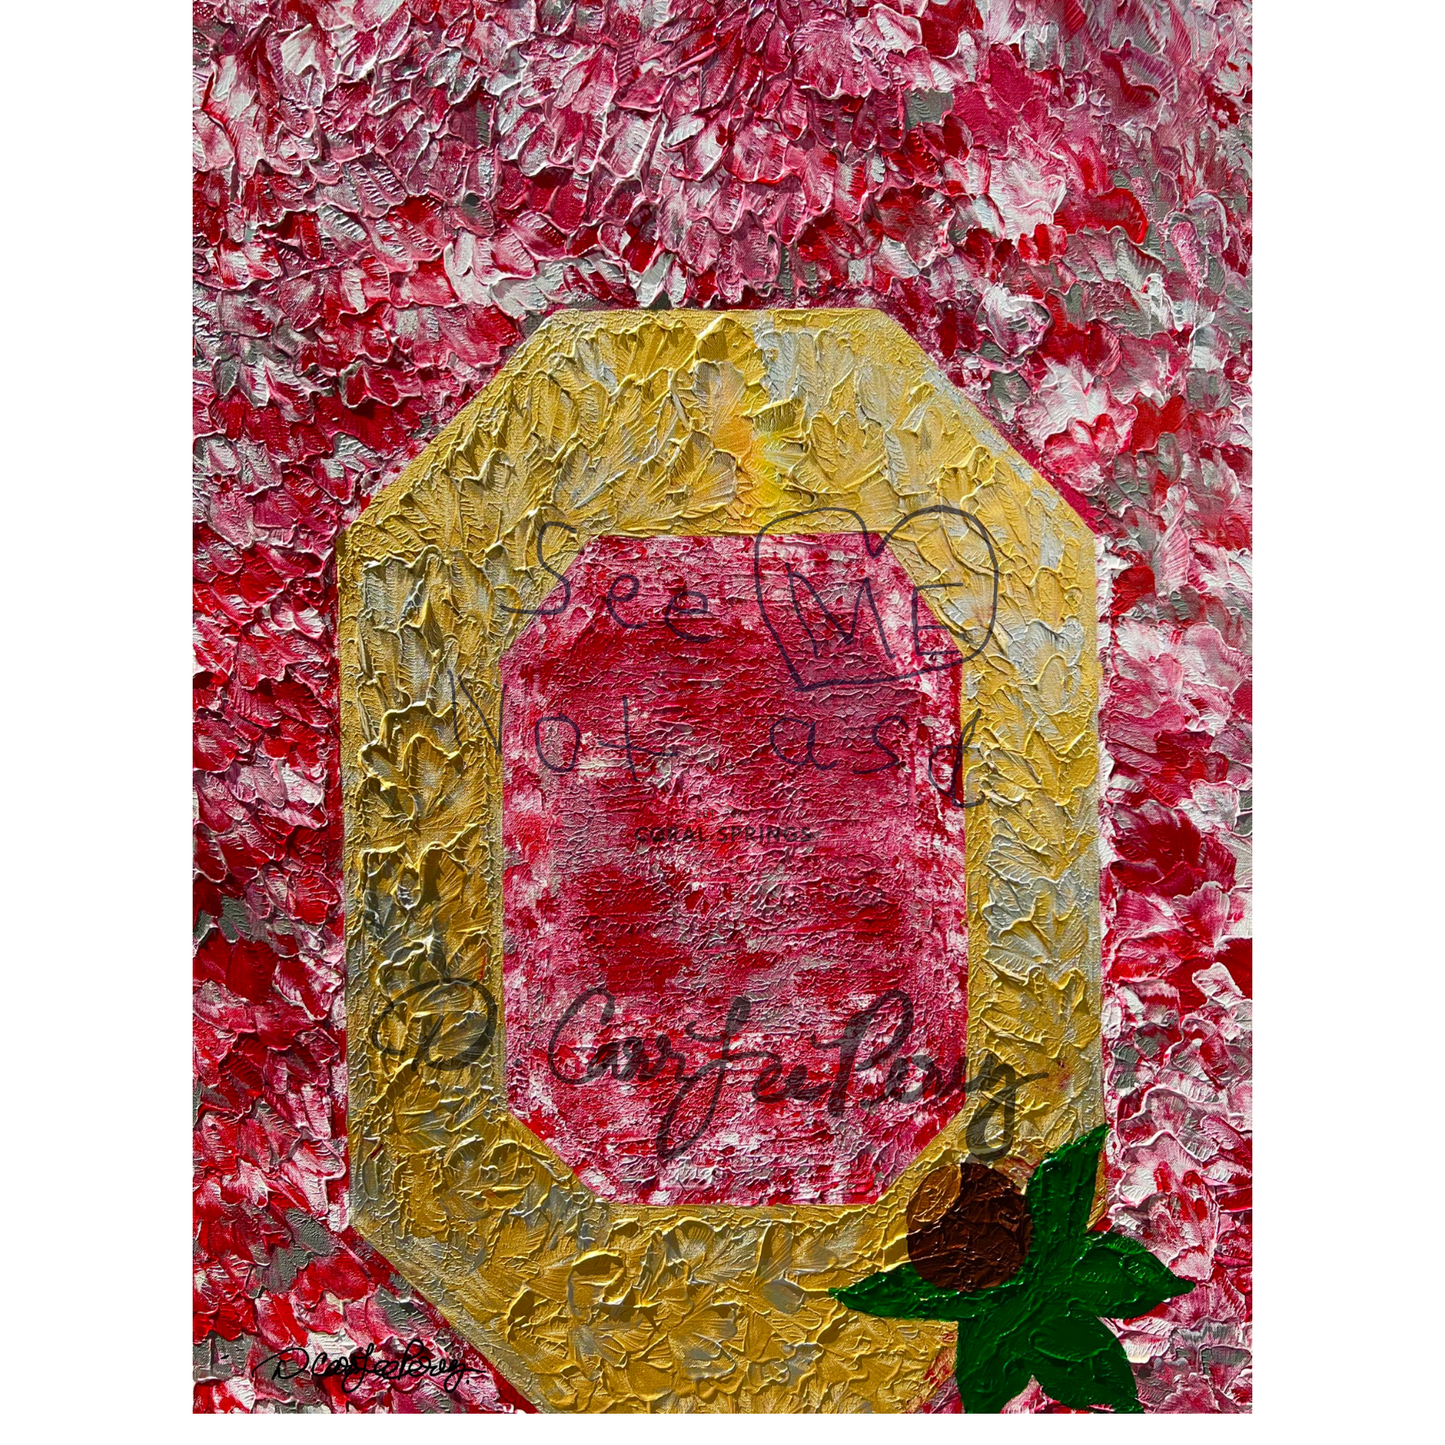 “A Golden Buckeye Tradition” - Original Painting by D.CarrLeePerez